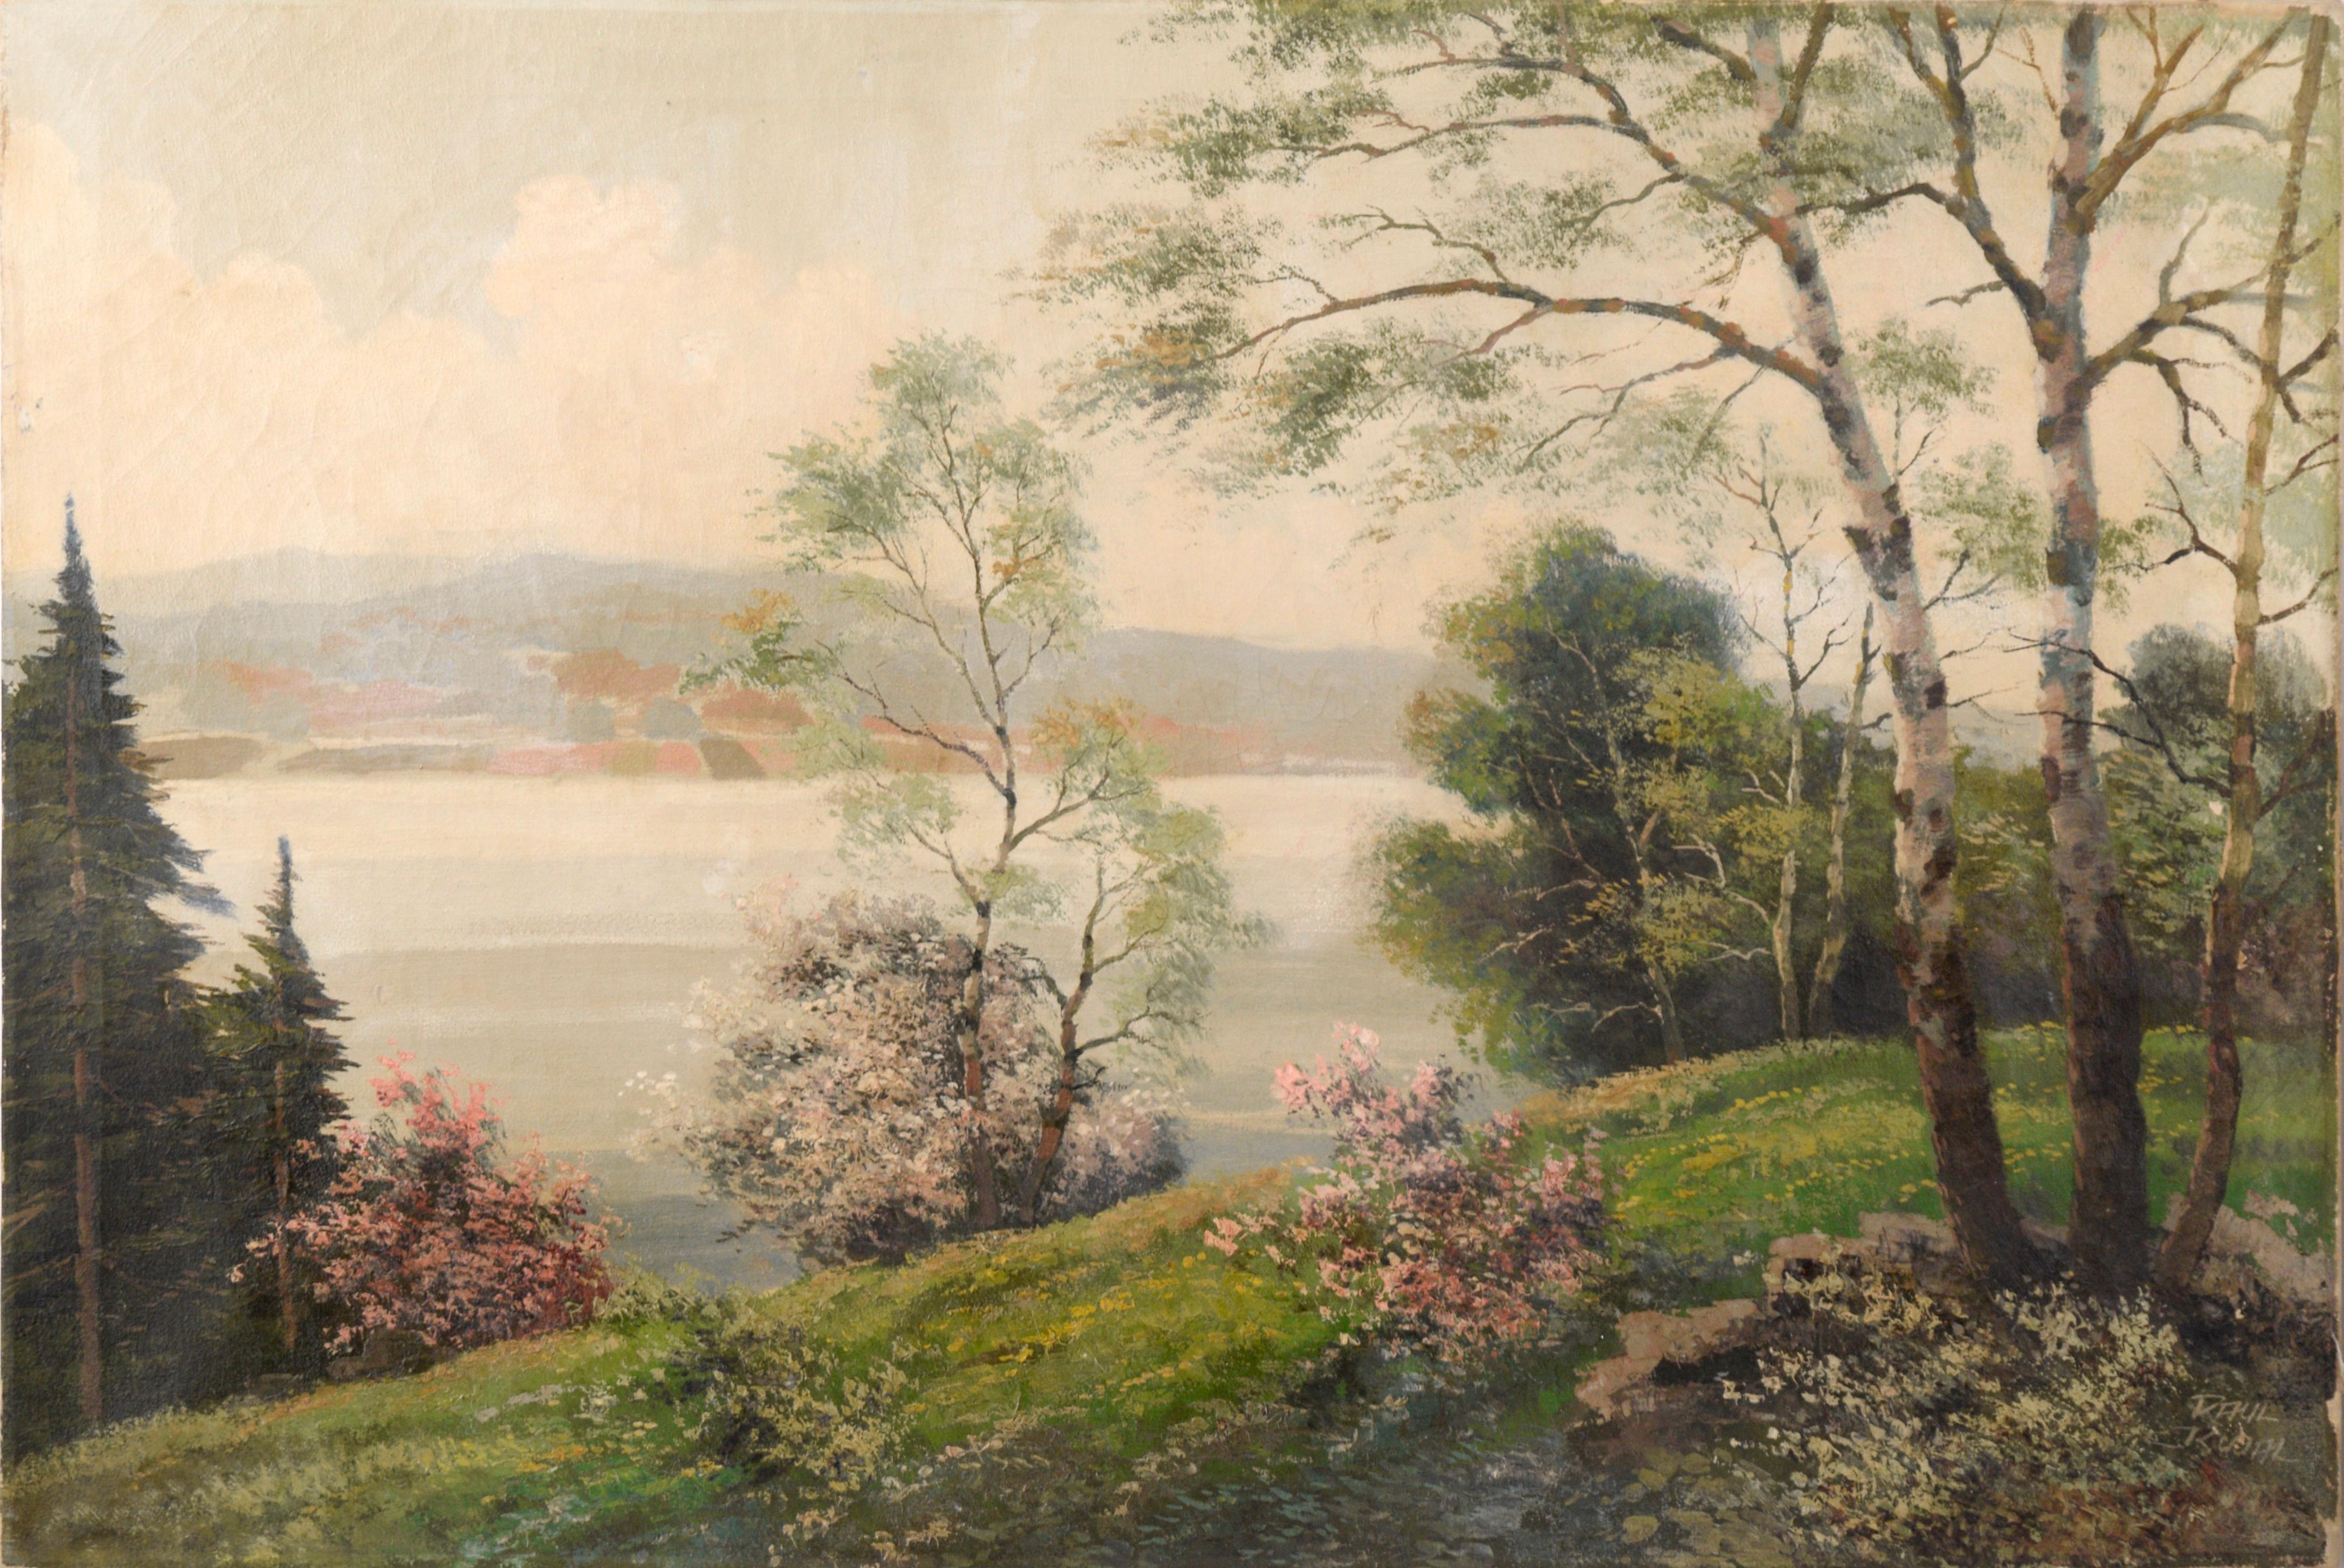 Hill Looking Over the Water, Early 20th Century Landscape by Paul Kujal